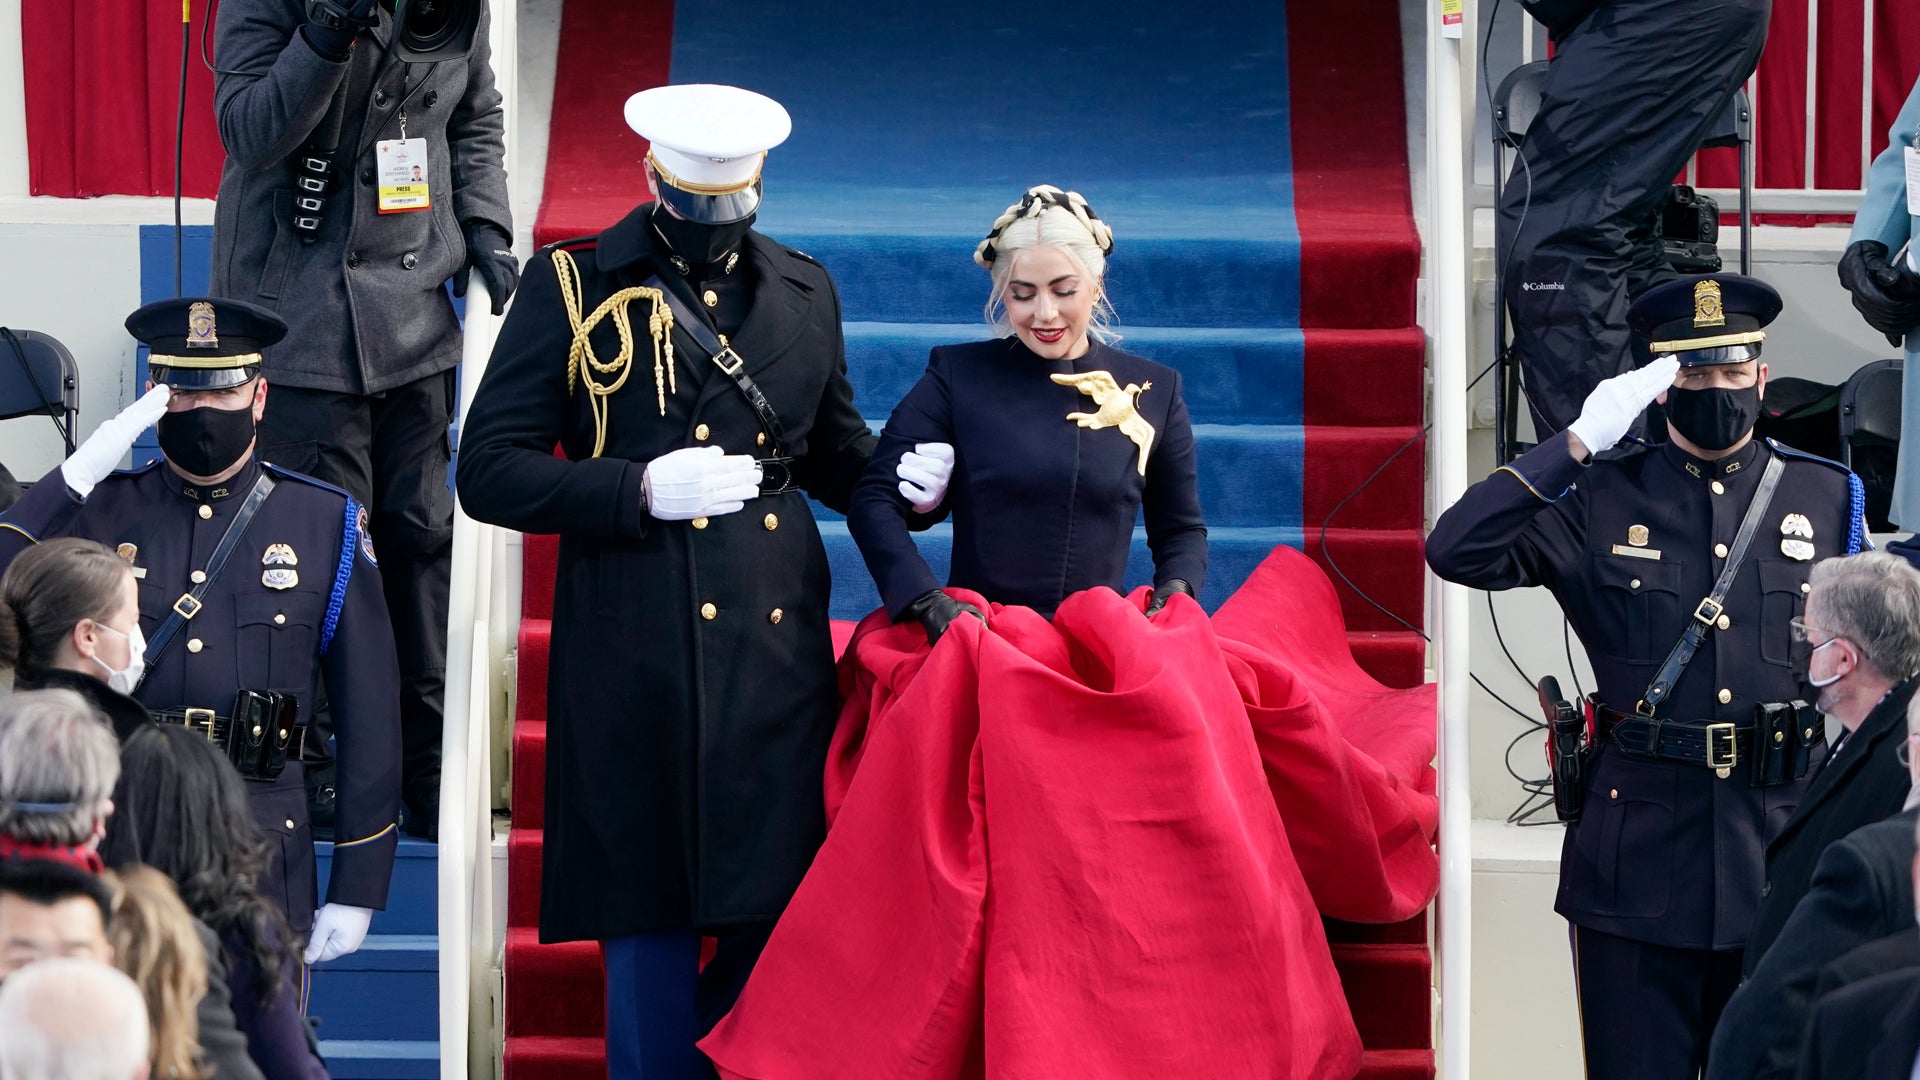 Meet the Marine from this viral Inauguration Day photo with Lady Gaga